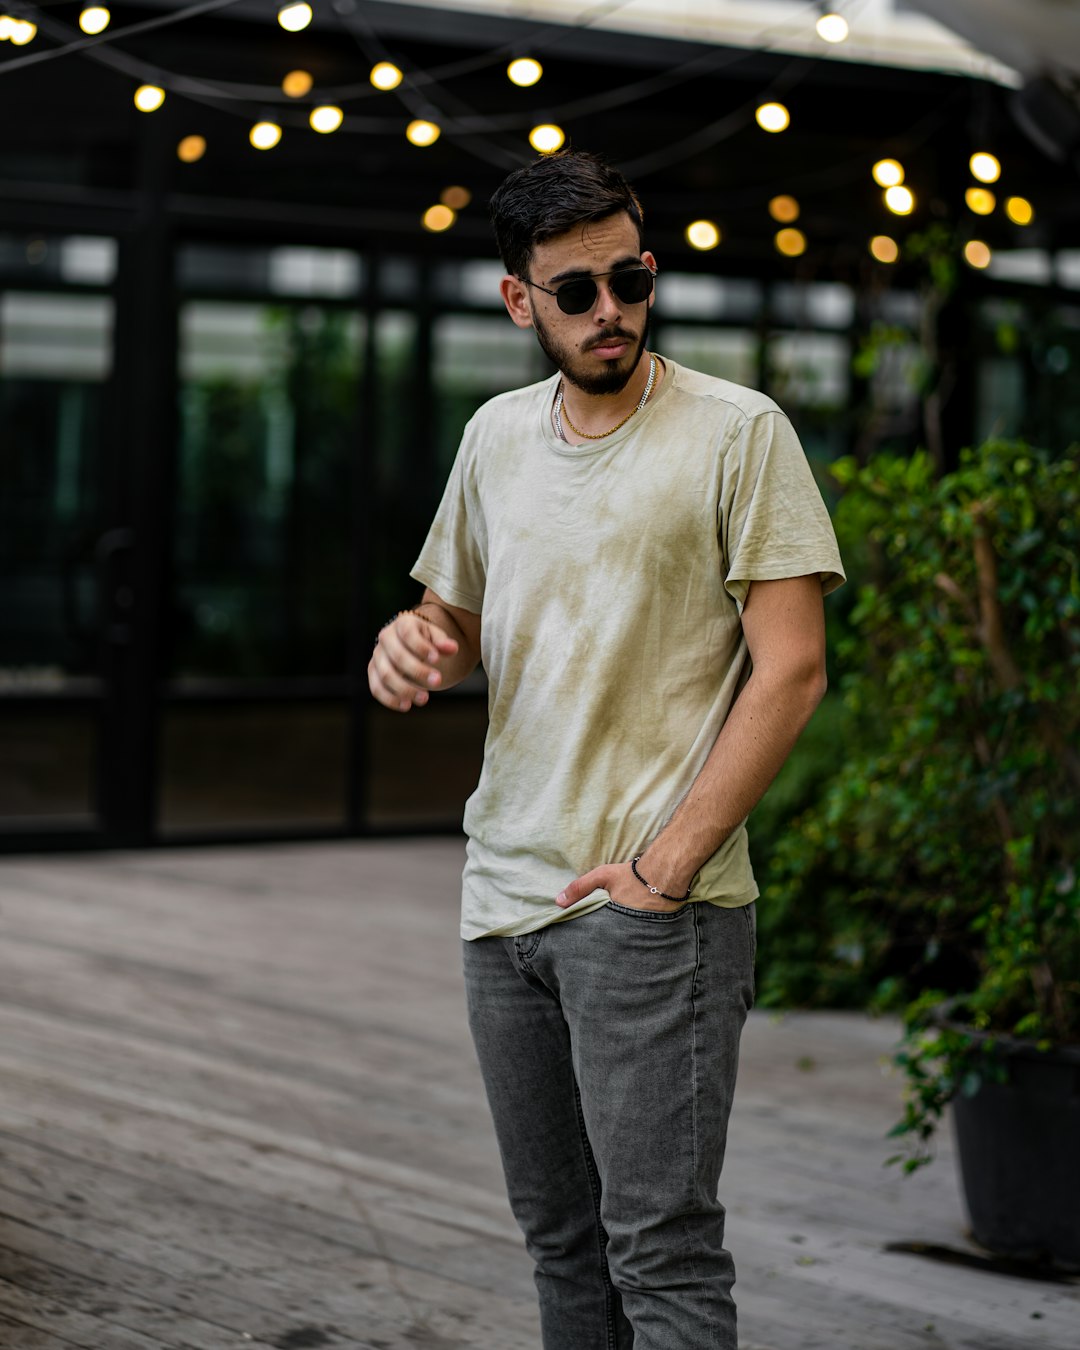 man in white crew neck t-shirt and blue denim jeans standing on sidewalk during daytime